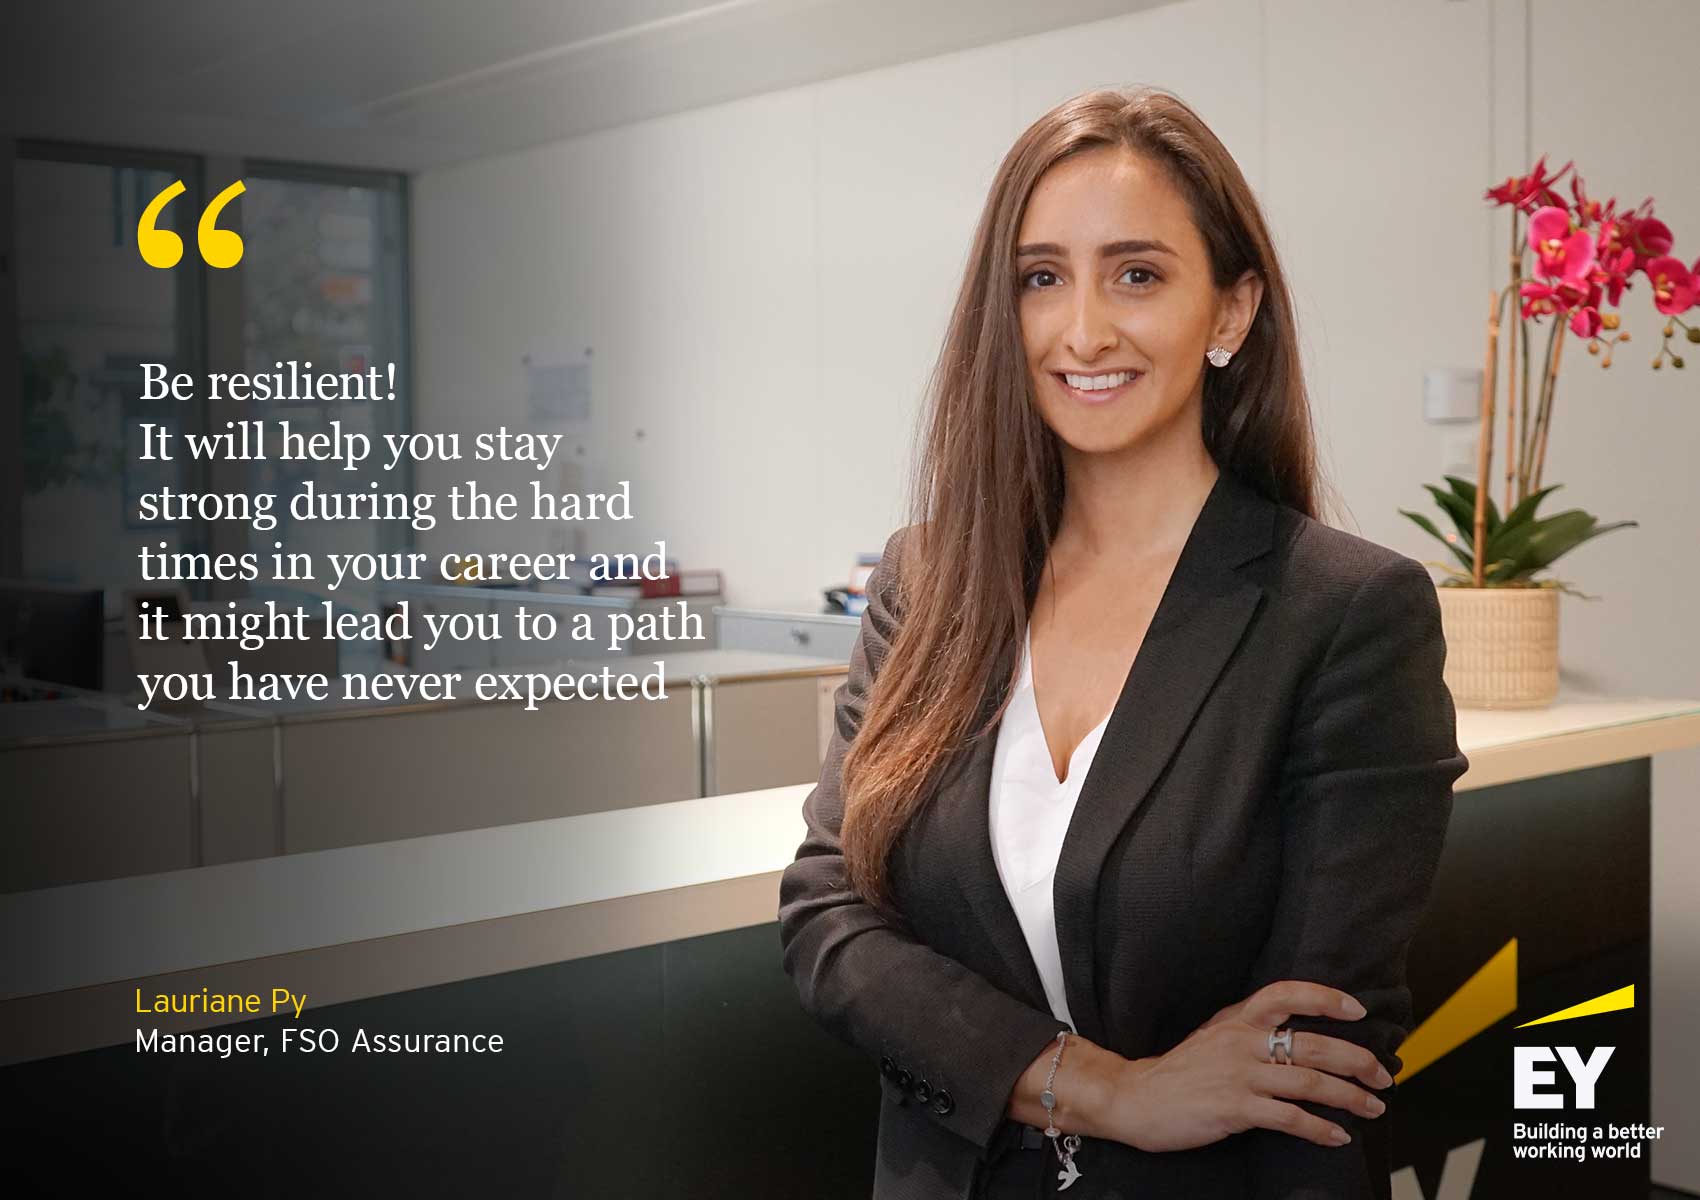 EY-Campaign-Extraordinary-Careers: Lauriane Py